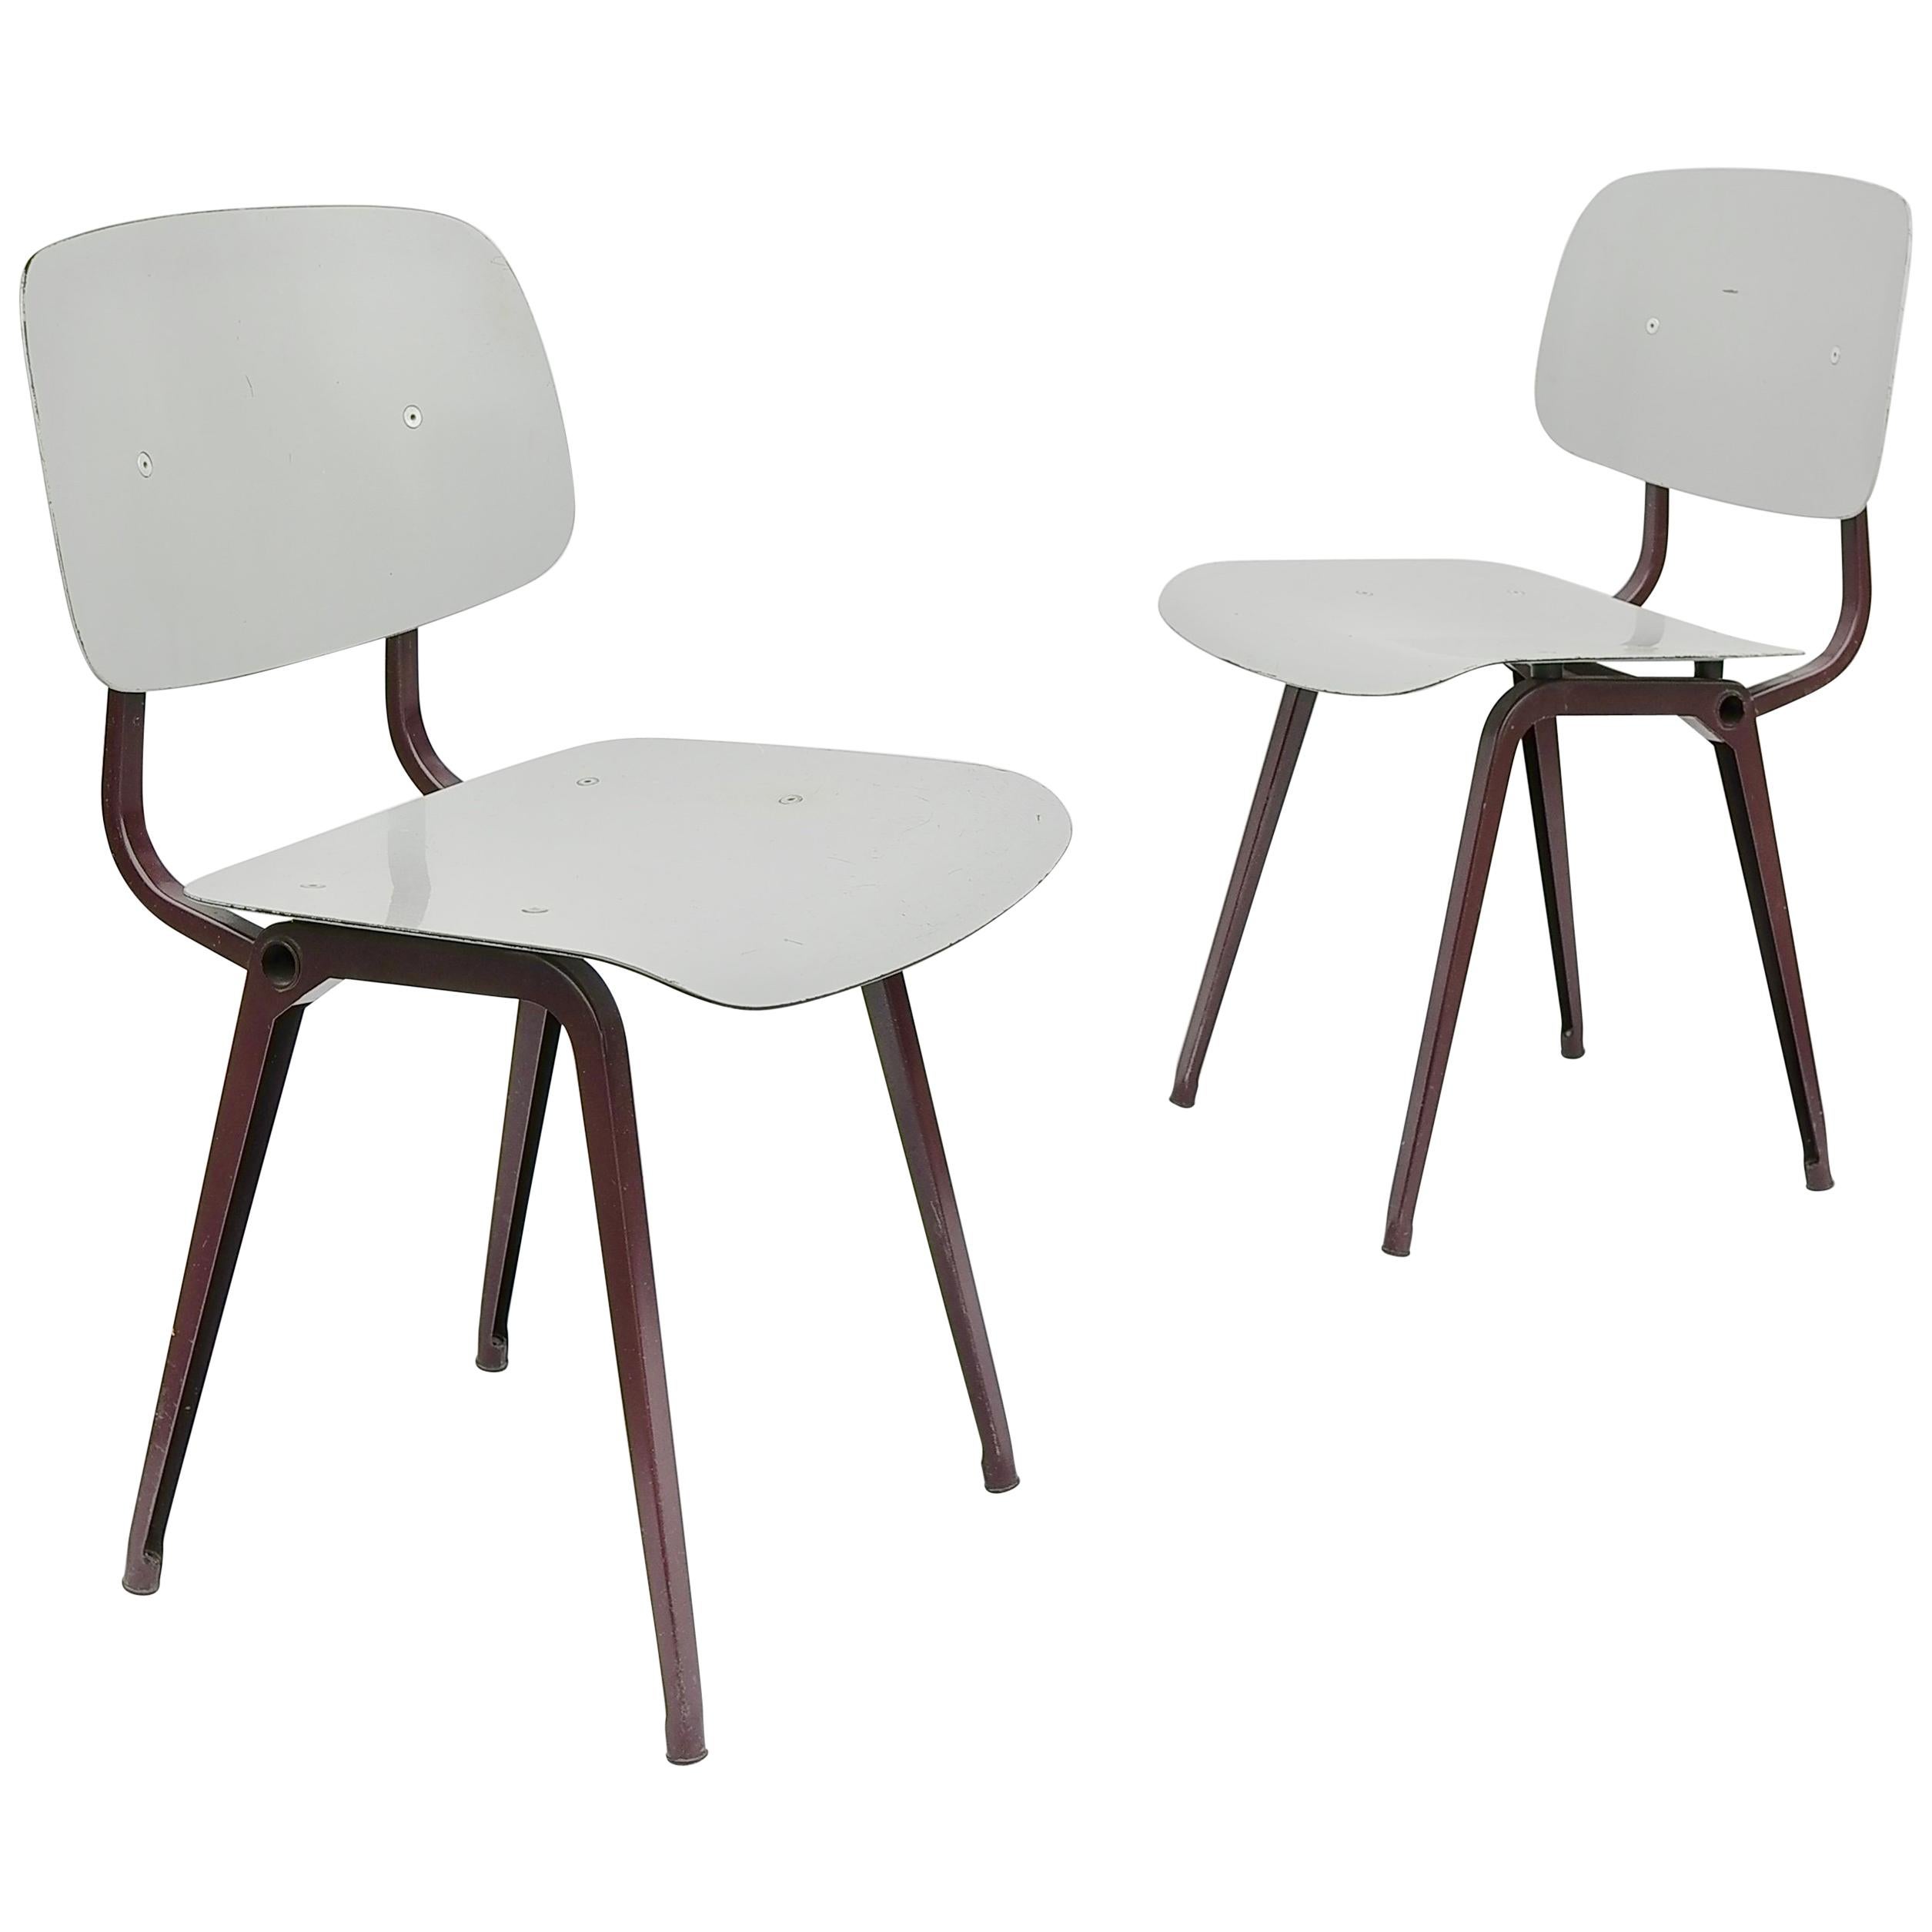 Rare Friso Kramer "Revolt" Chairs in Burgundy Red and Grey For Sale